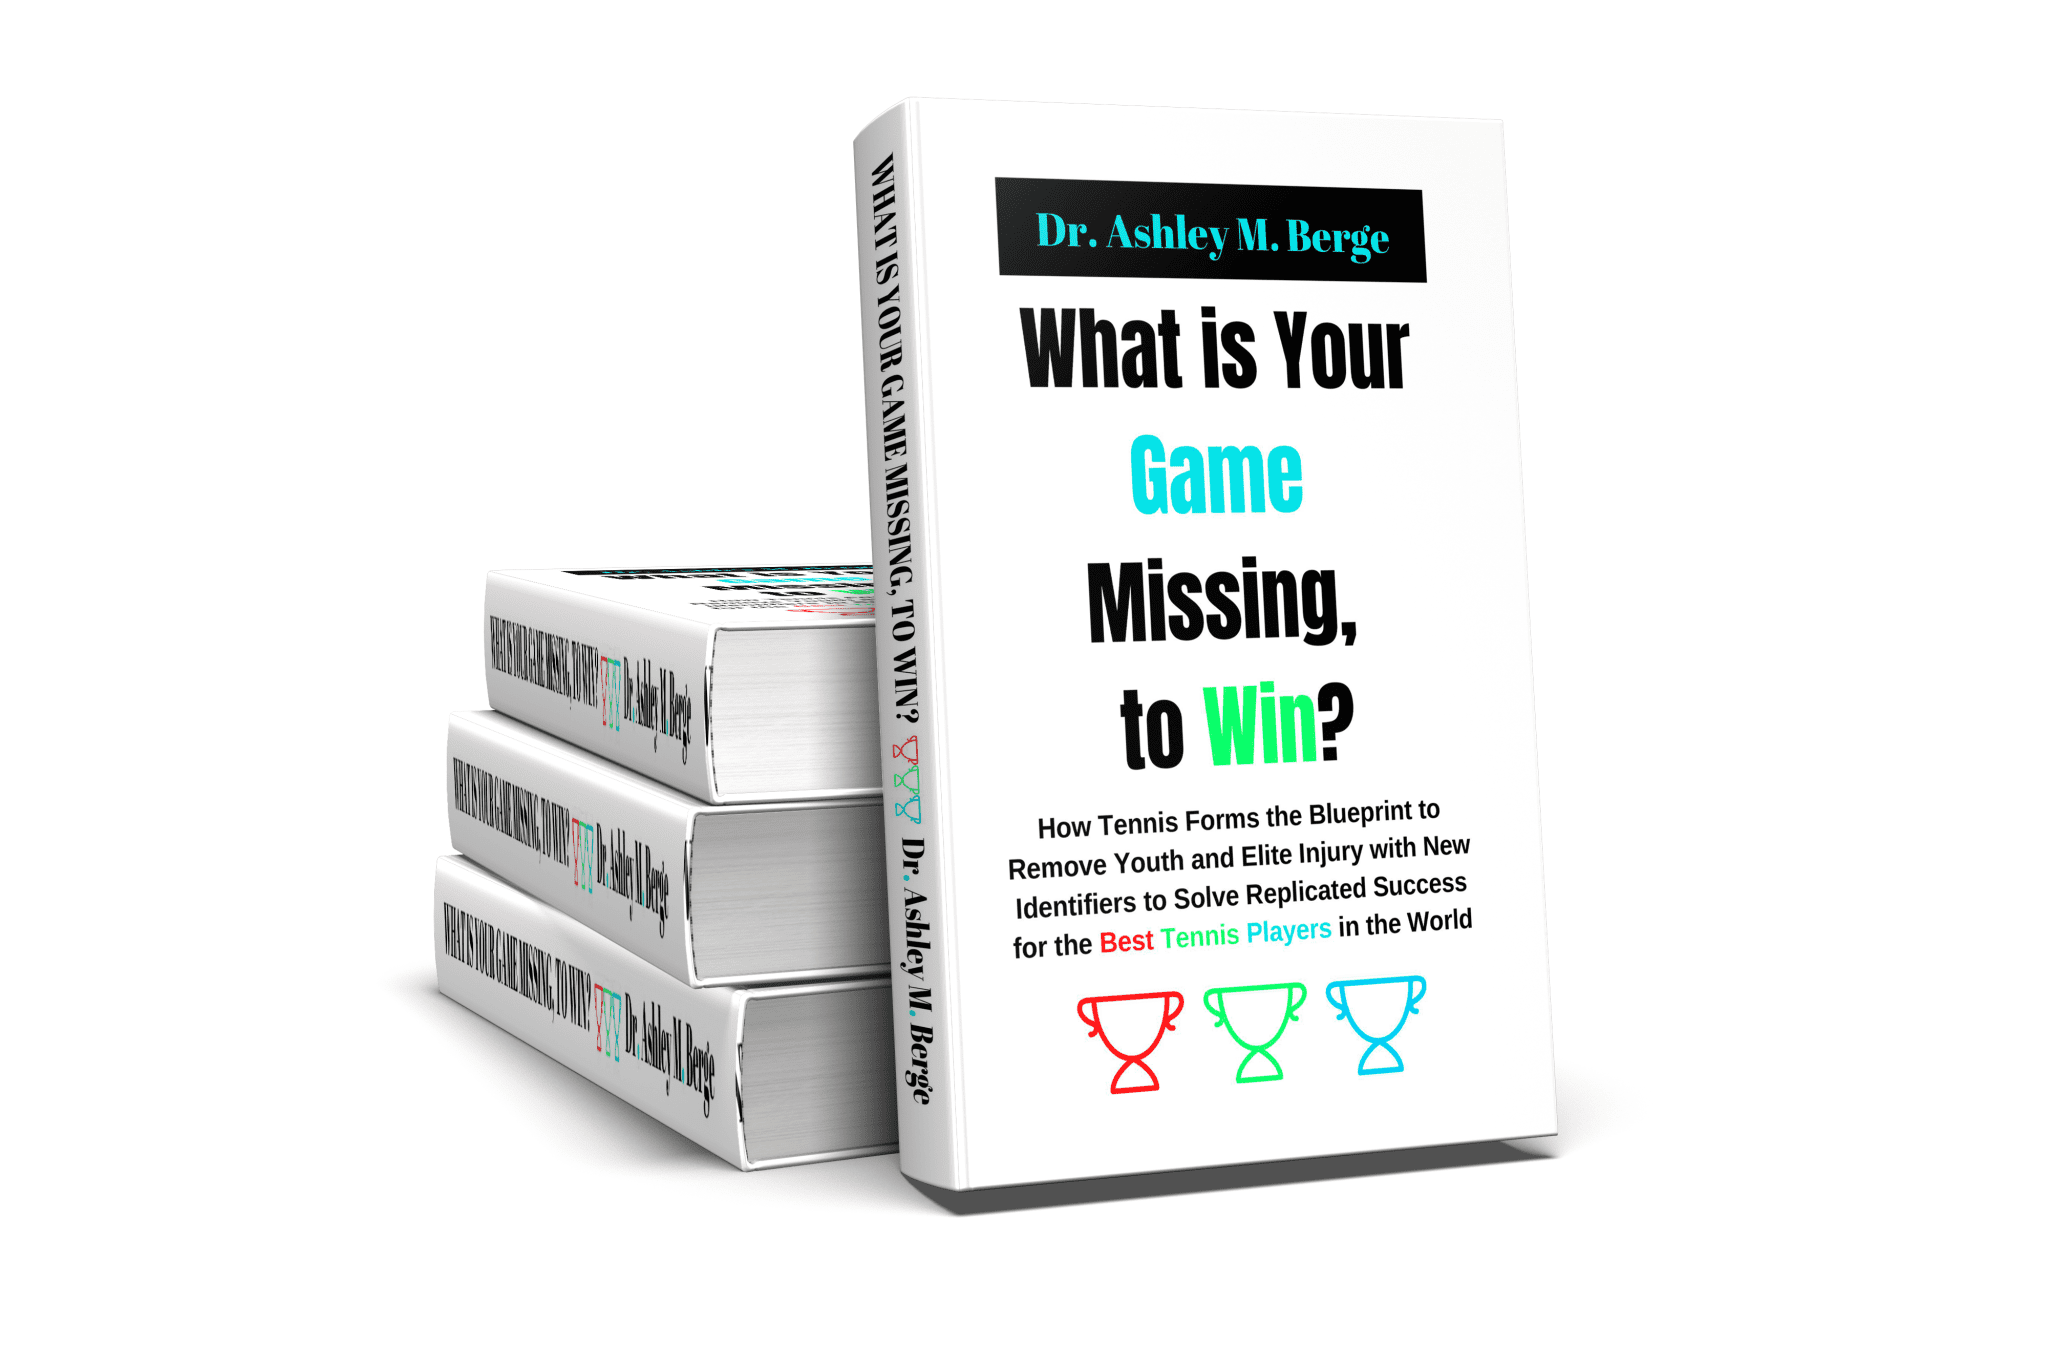 What is Your Game Missing, <a href="https://am8international.com/product/rrp-what-is-your-game-missing-to-win-download-only/" data-type="product" data-id="17584" rel="nofollow">to Win?</a>